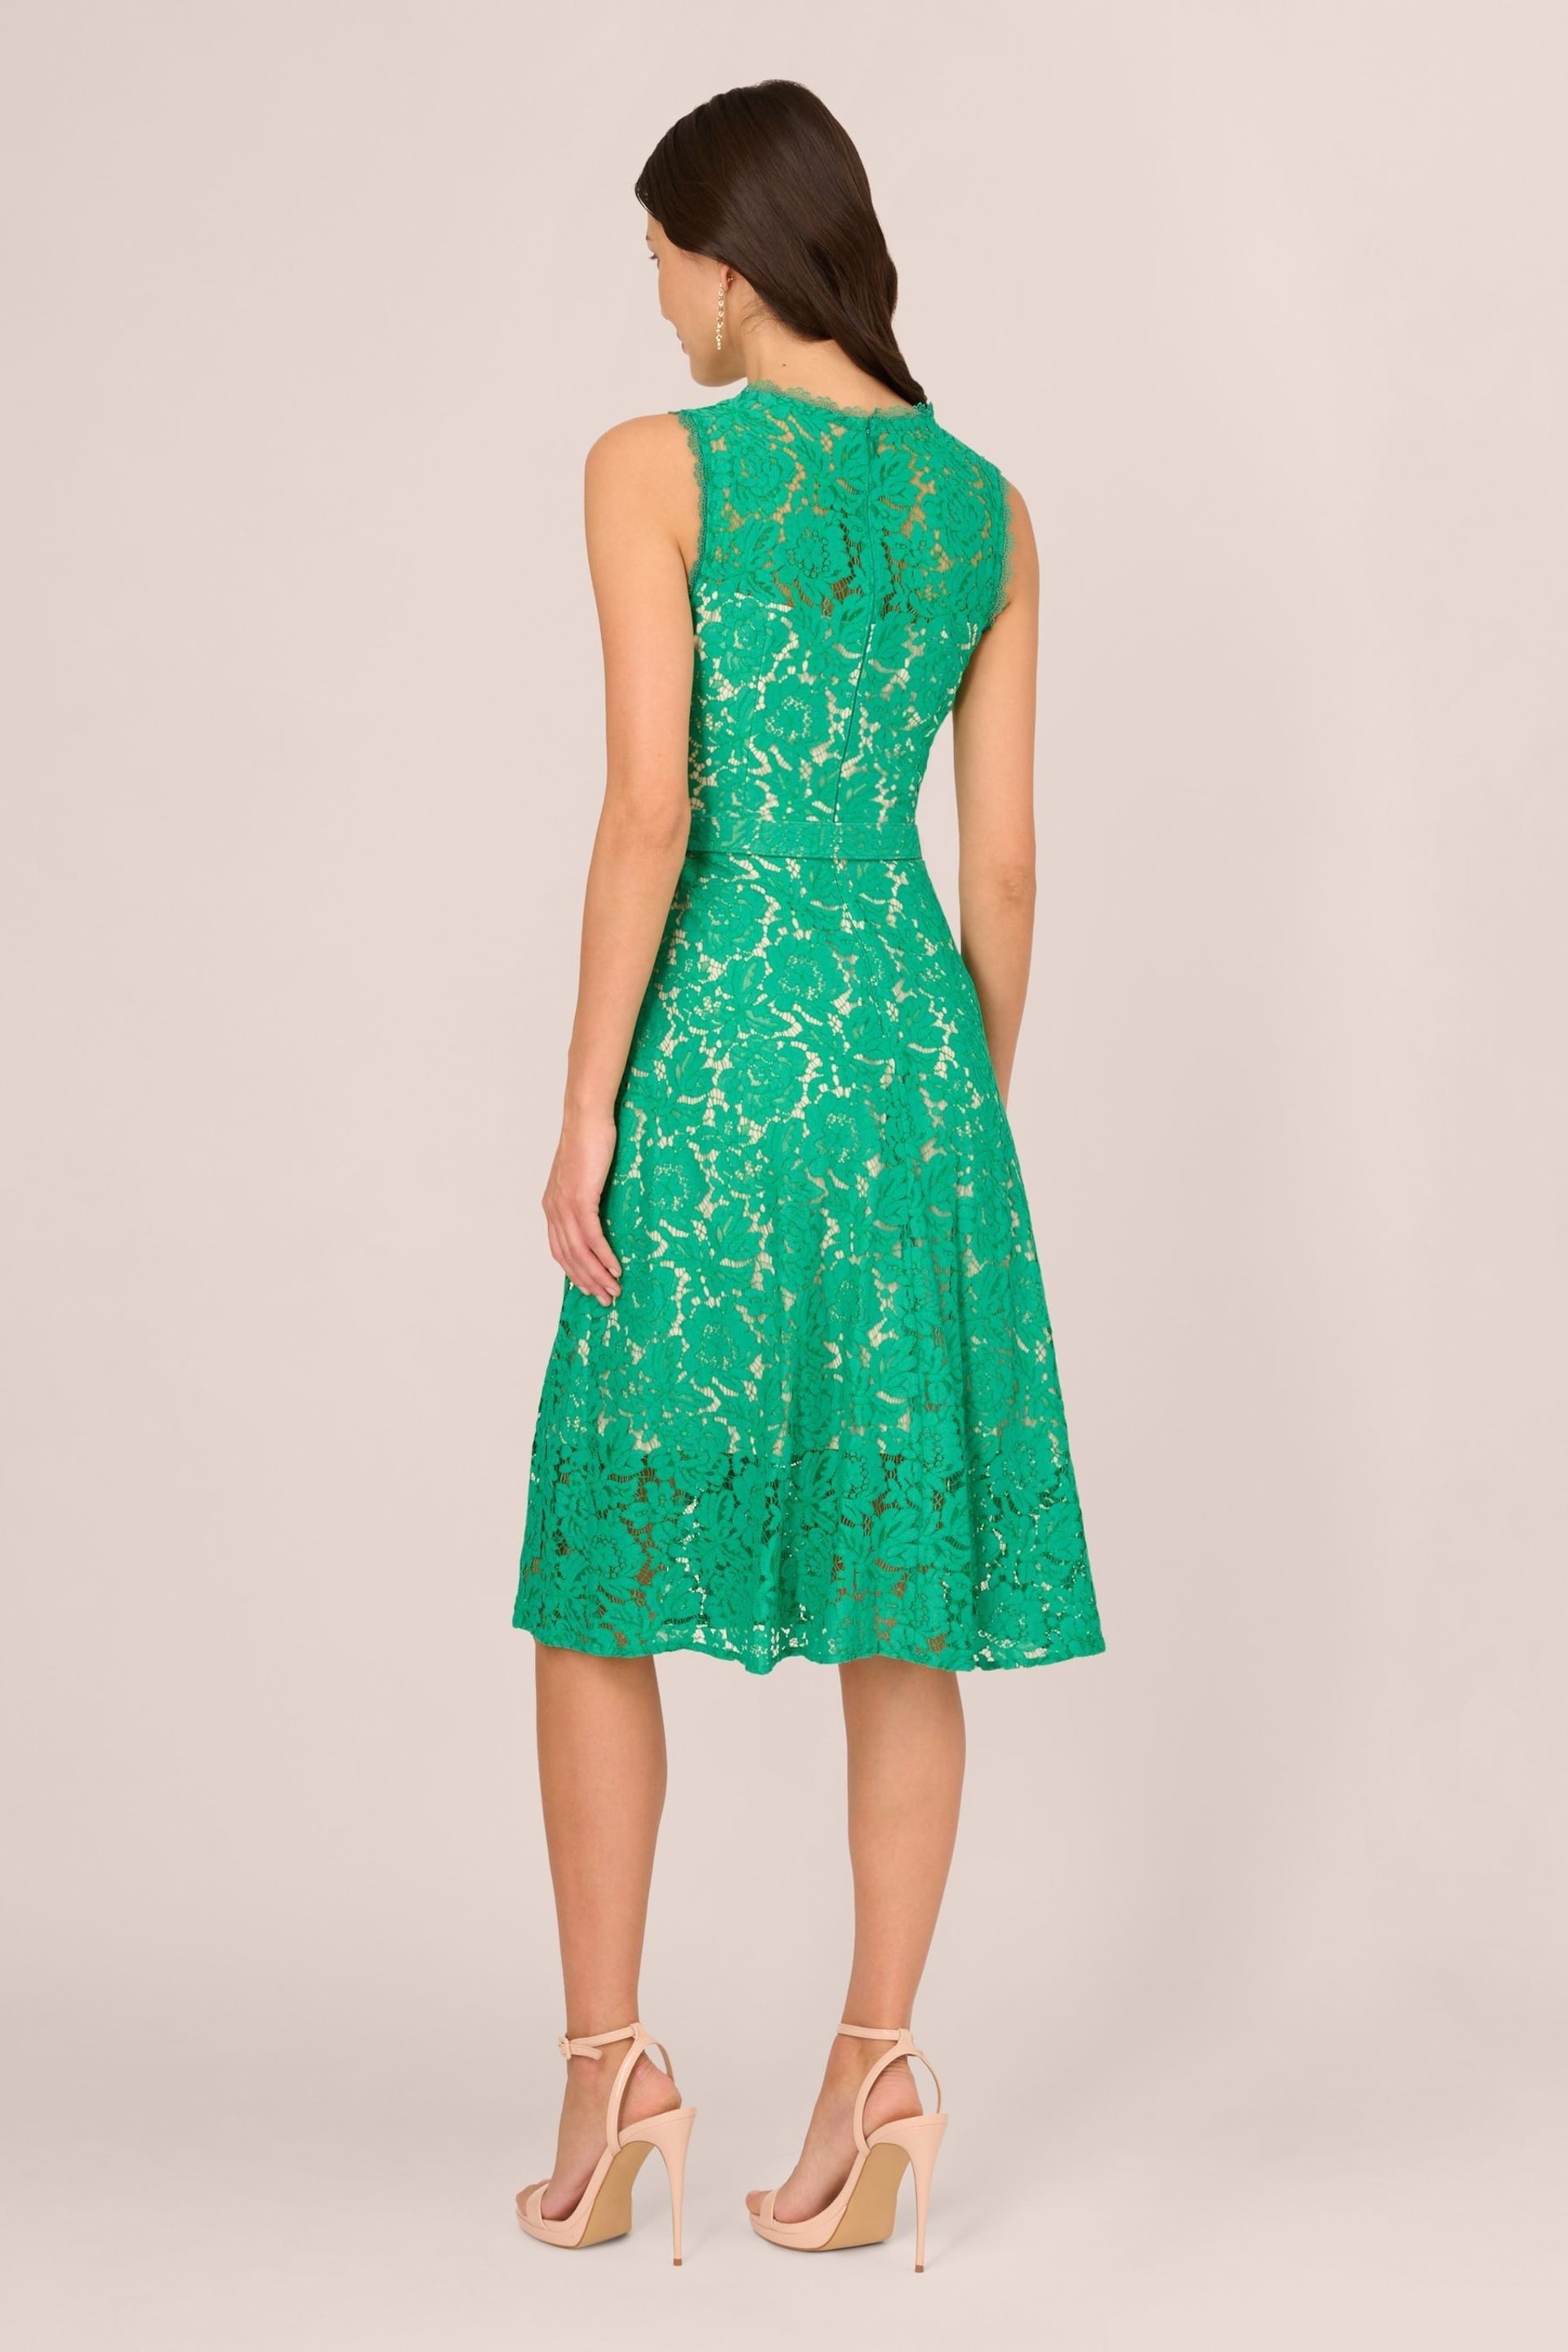 Adrianna Papell Green Lace Midi Dress - Image 2 of 7